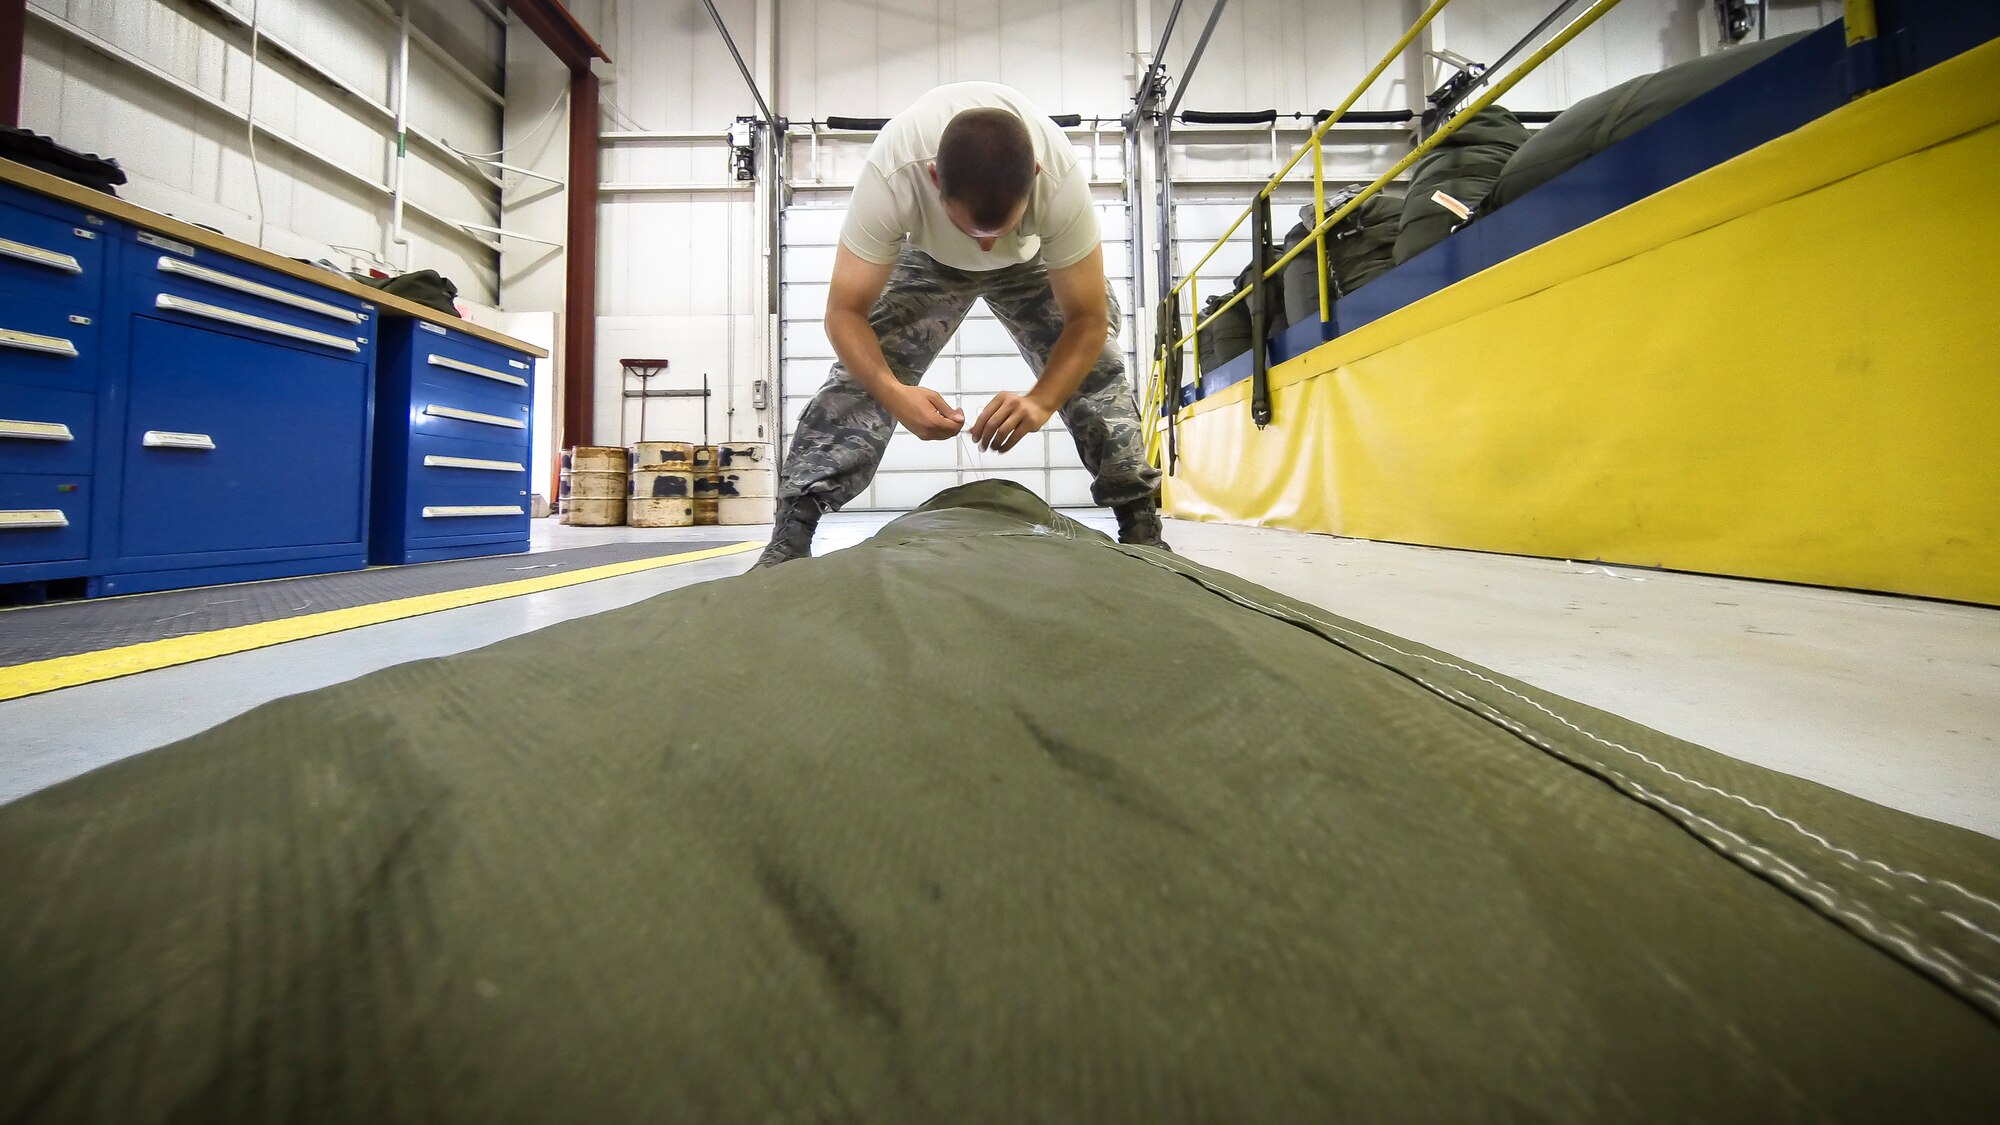 Technical Sgt. Jeremy Martinson ties up a G-12E Type V platform parachute after recovering it from the dropzone on June 6, 2015. The Airman from the 182d Airlift Wing, Small Air Terminal, Peoria, Ill. check and repack the parachute after it was used in a recent C-130 air drop training mission with heavy equipment at the dropzone. (U.S. Air National Guard photo by Master Sgt. Scott Thompson/Released)